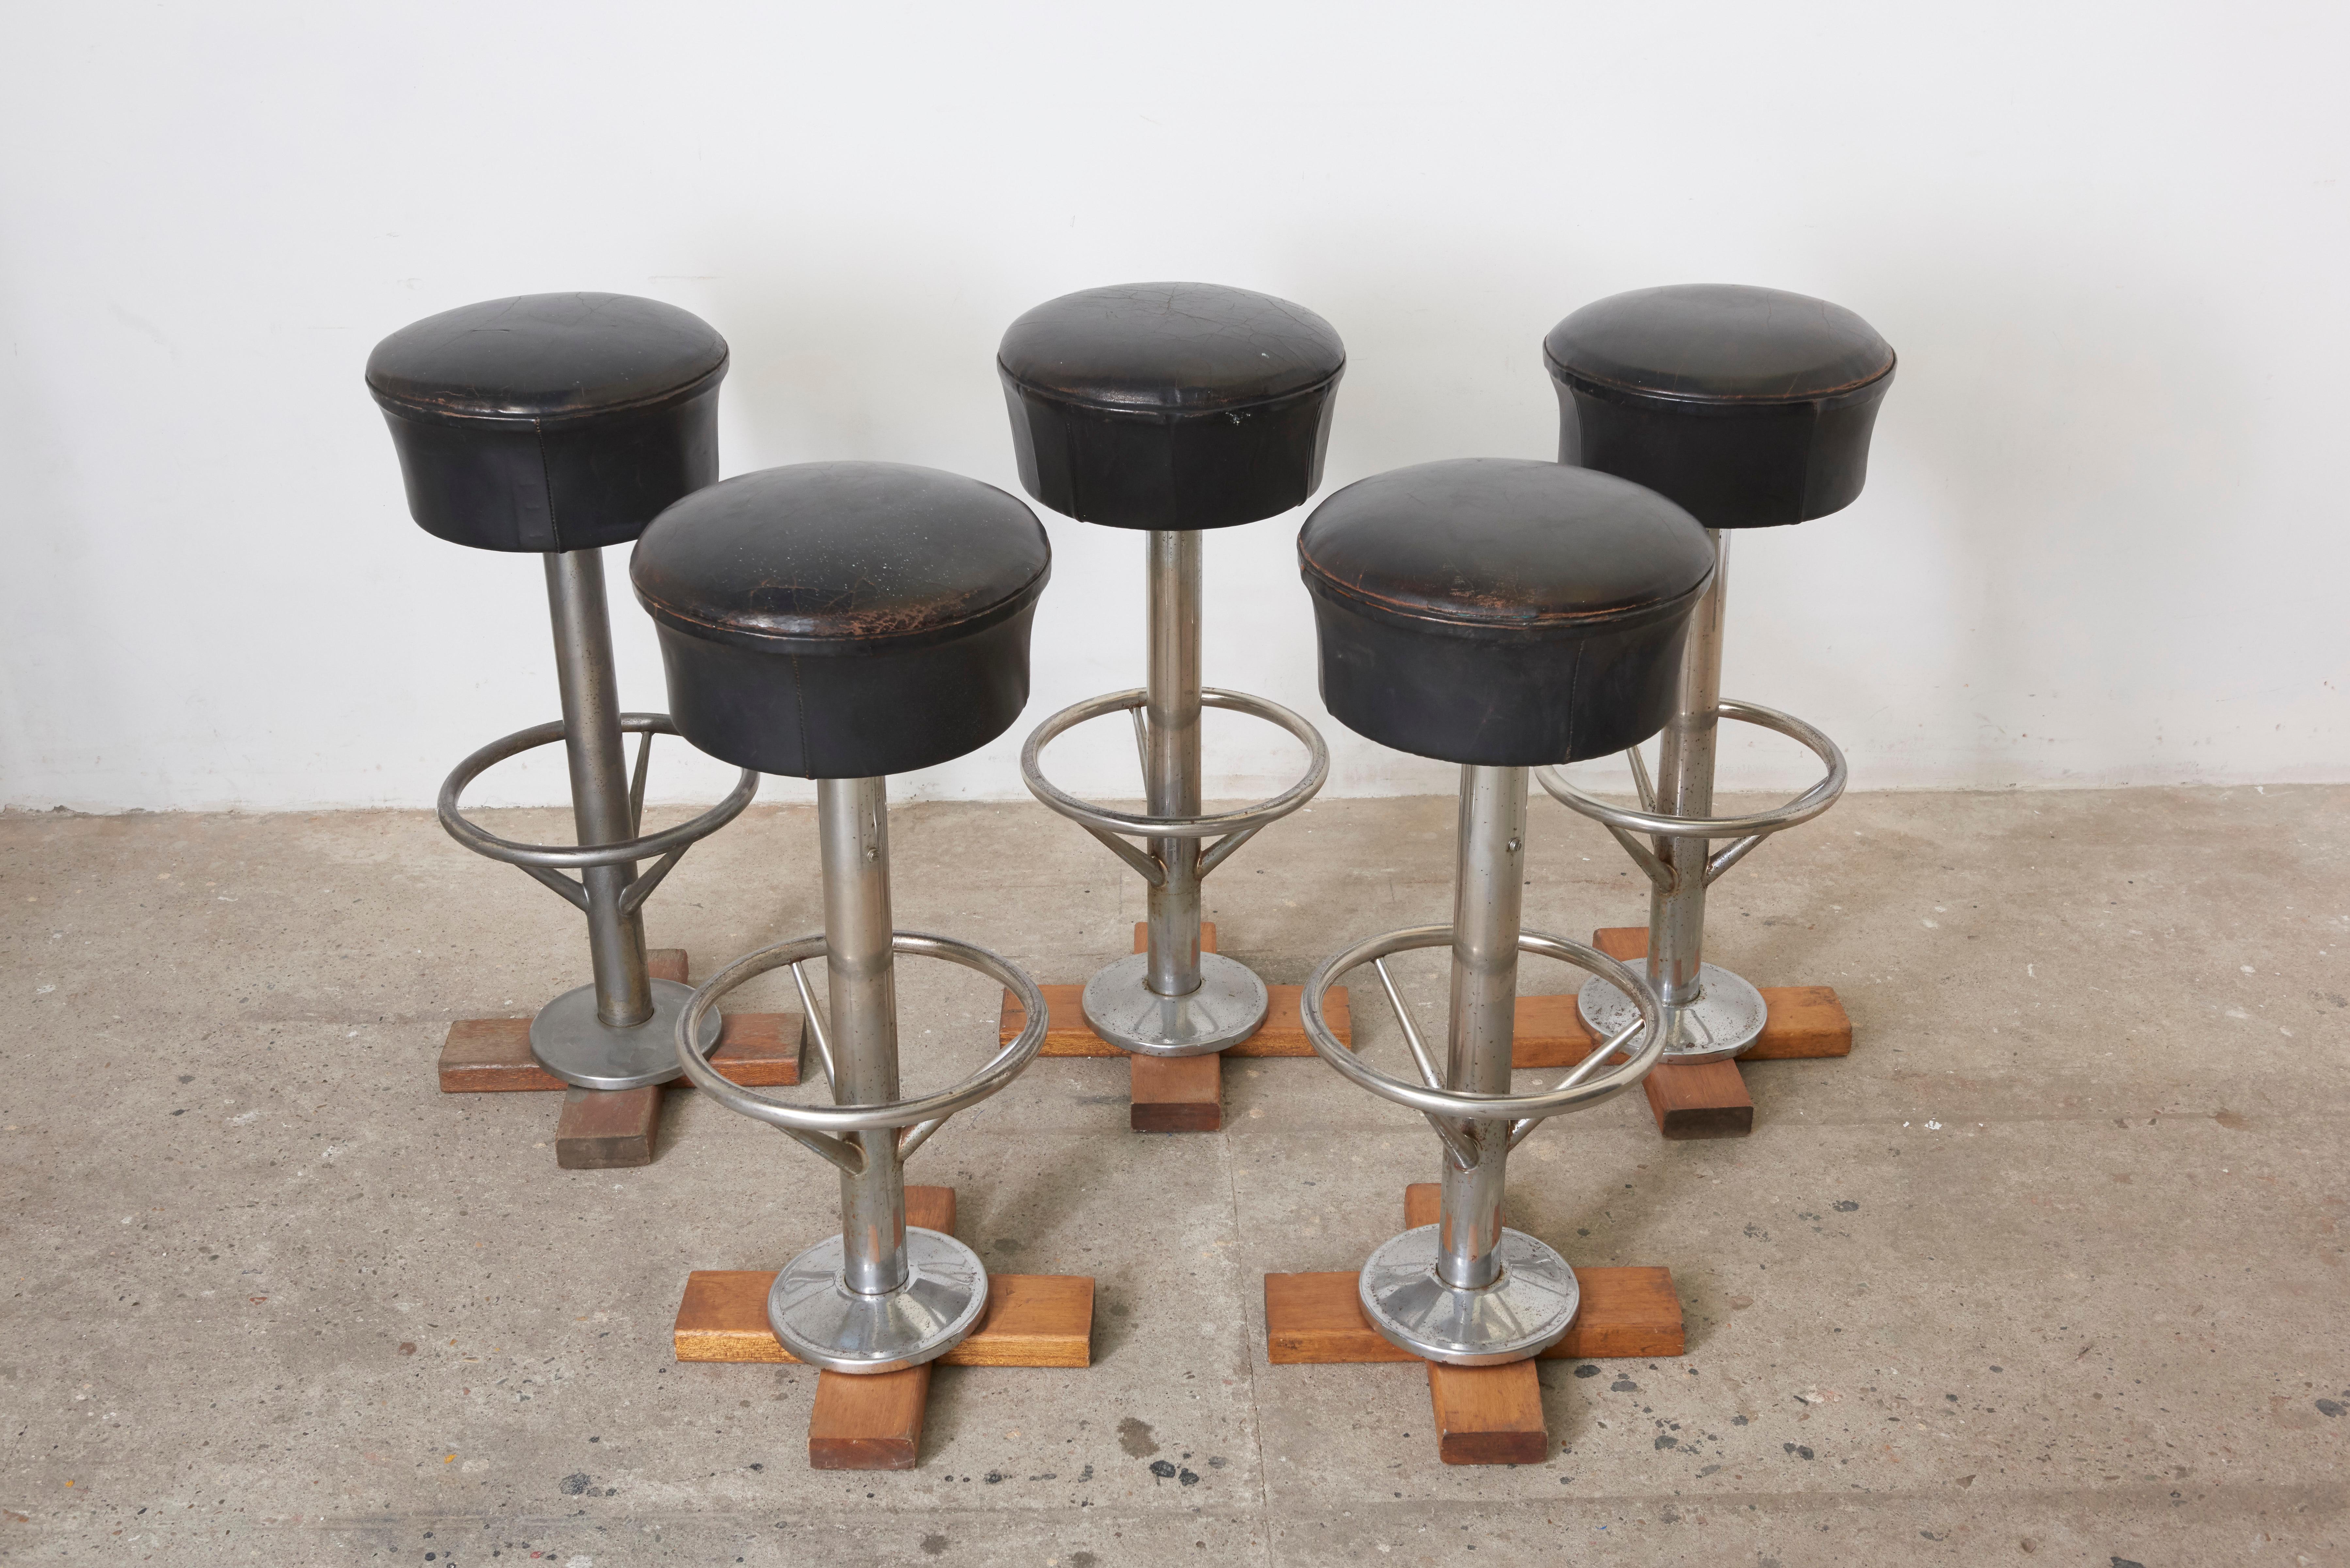 Set of five bar stools with revolving sit in original leather and beautiful patina, the base is chromed steel.
These bar stools were used to be on a former boat so they could also be screwed to a wooden floor. The wooden cross can be removed at the